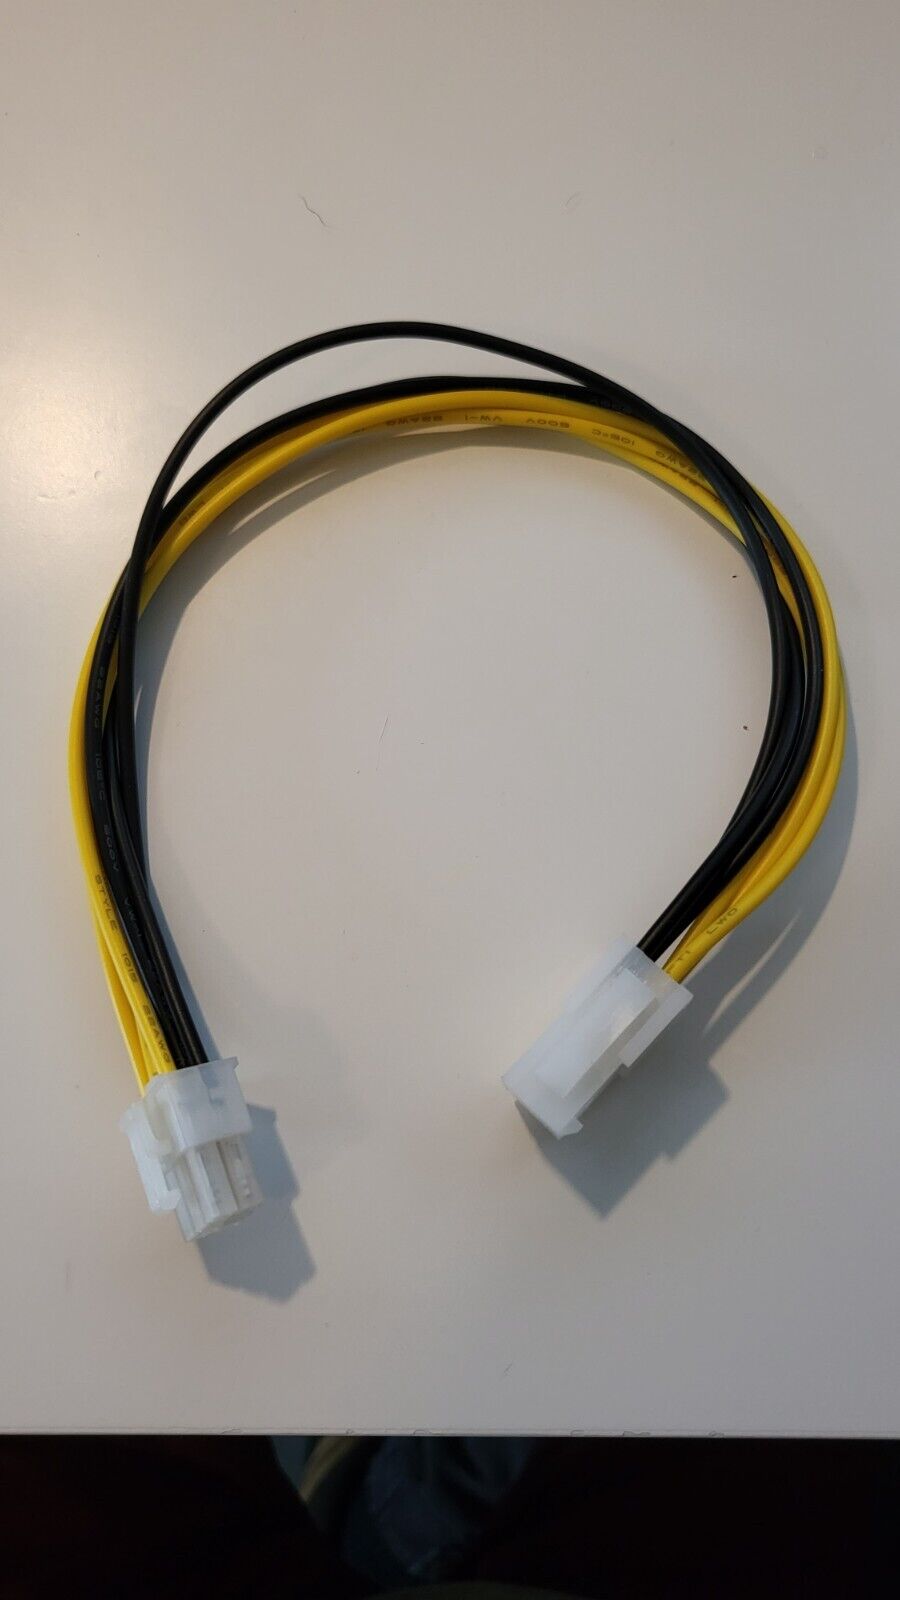 6Pin Male to 6-Pin Female Video Card Power Extension Cable Yellow and Black